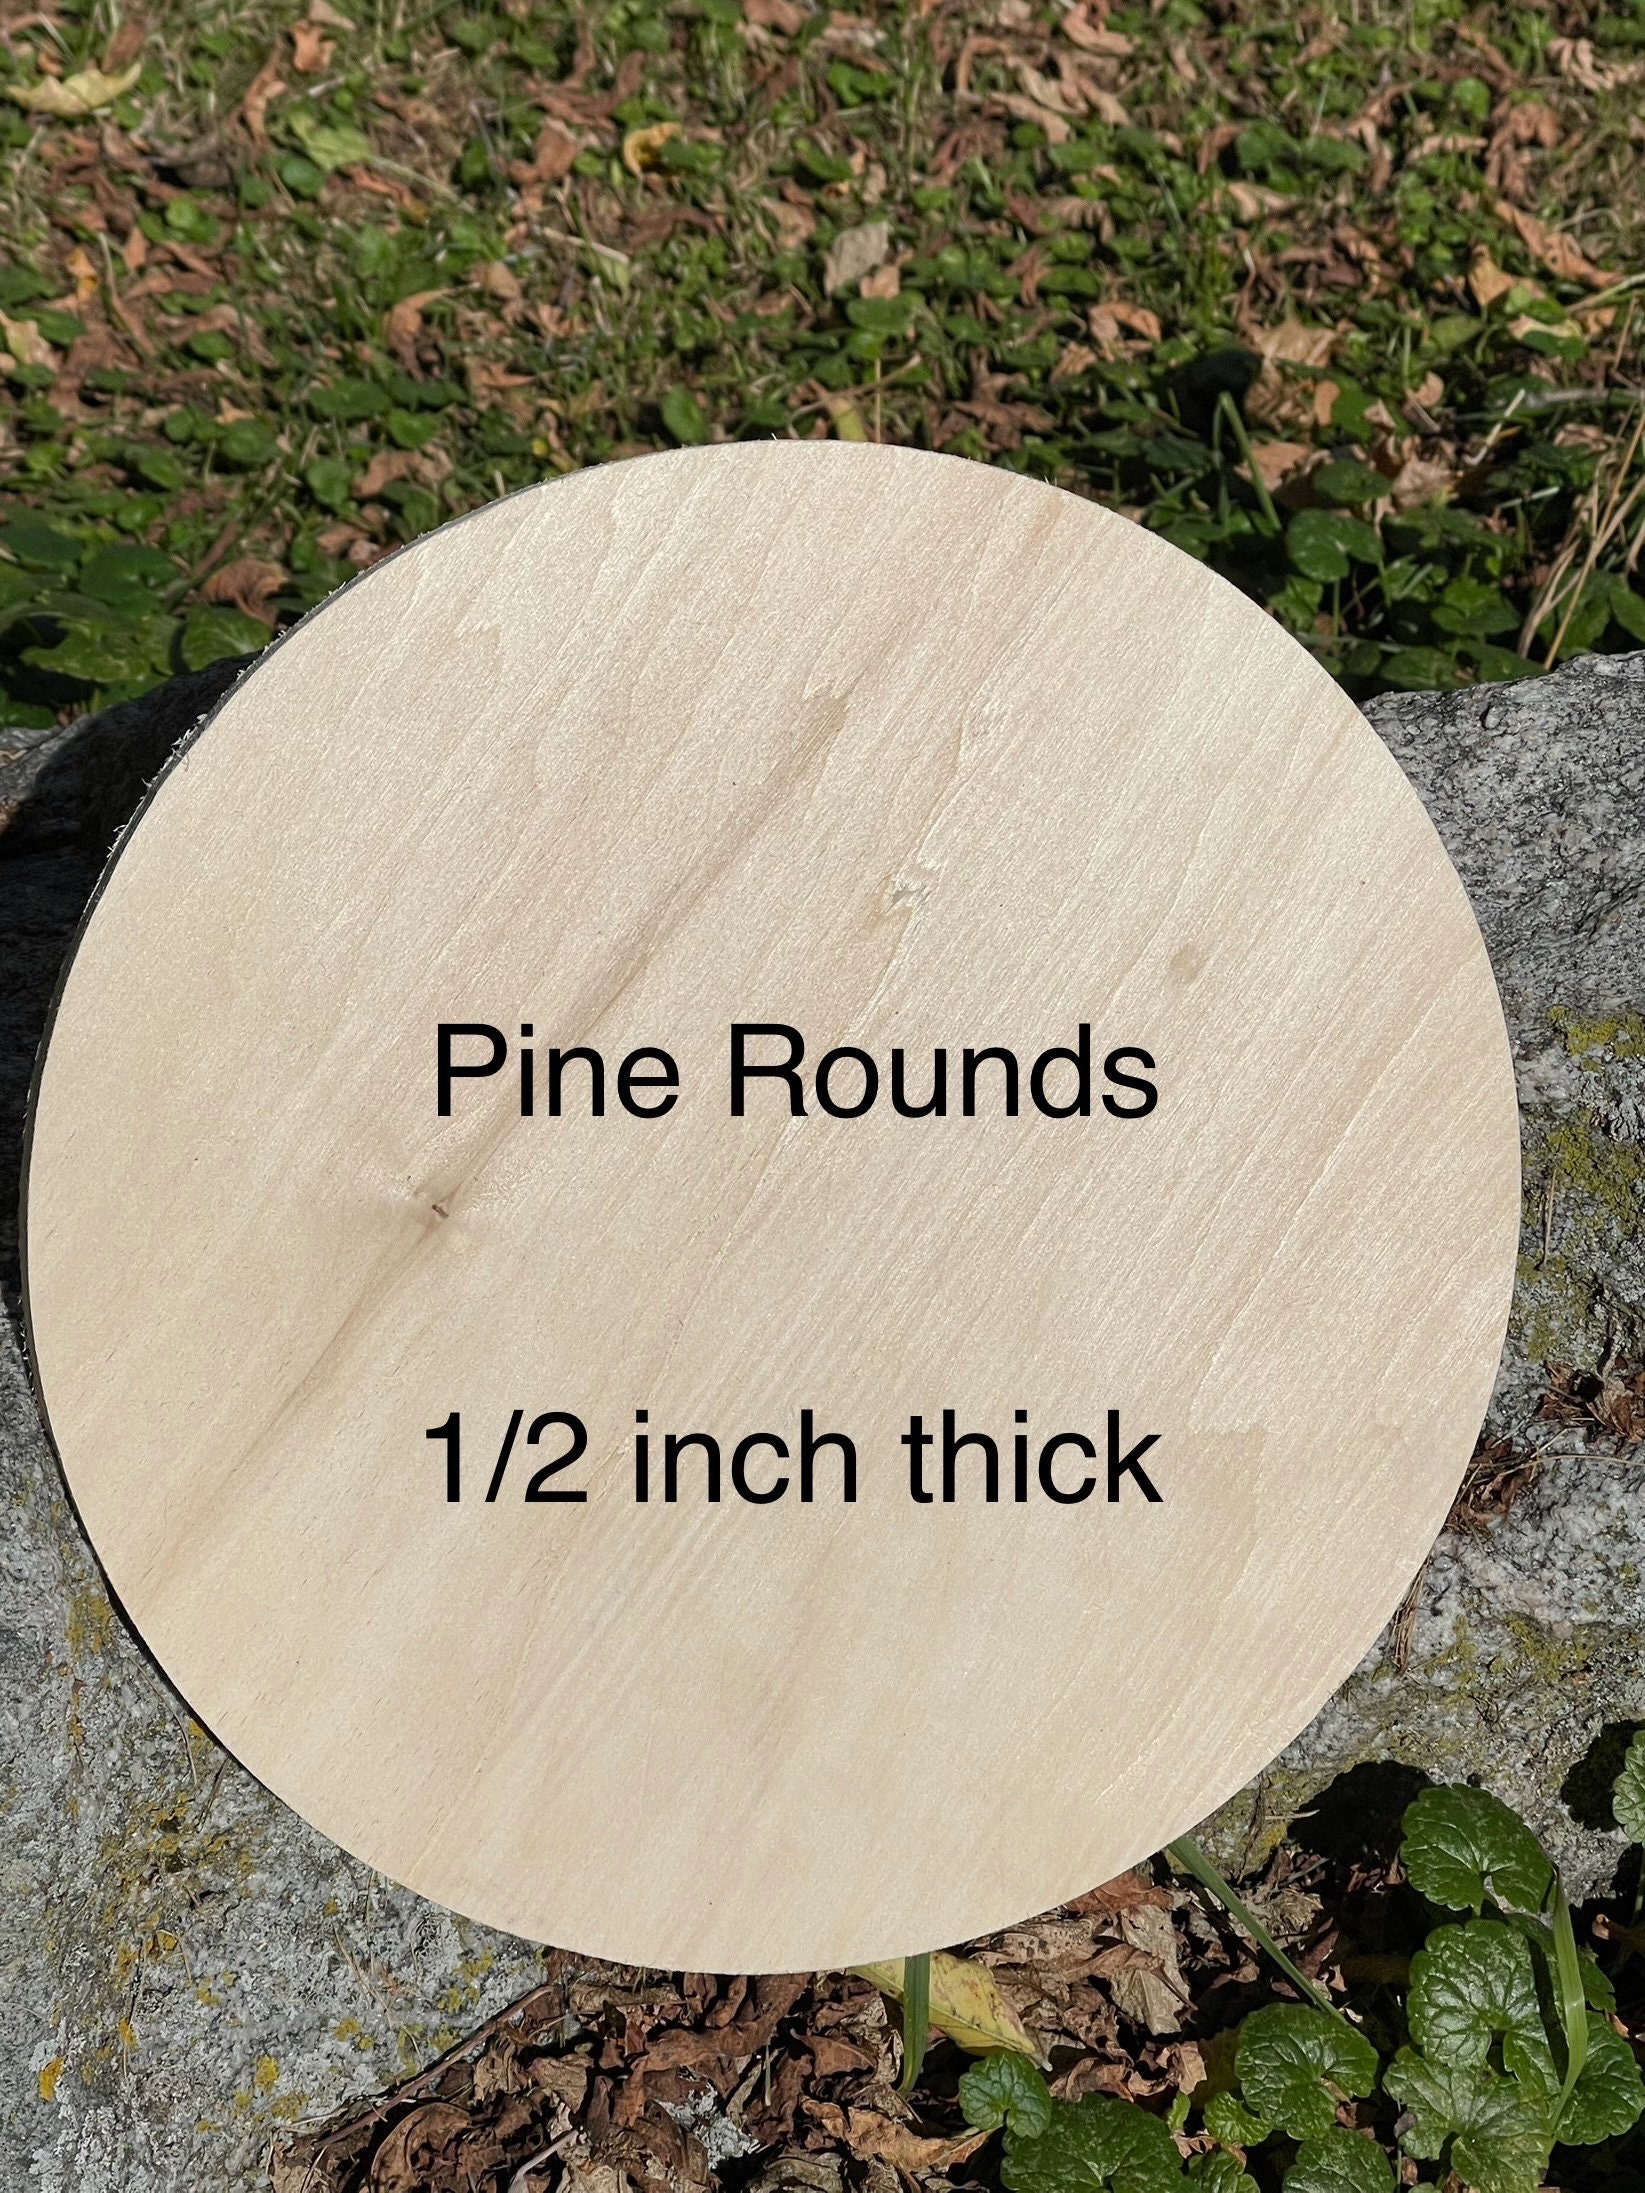  Wood Circles 10 inch, 1/4 Inch Thick, Birch Plywood Discs, Pack  of 3 Unfinished Wood Circles for Crafts, Wood Rounds by Woodpeckers